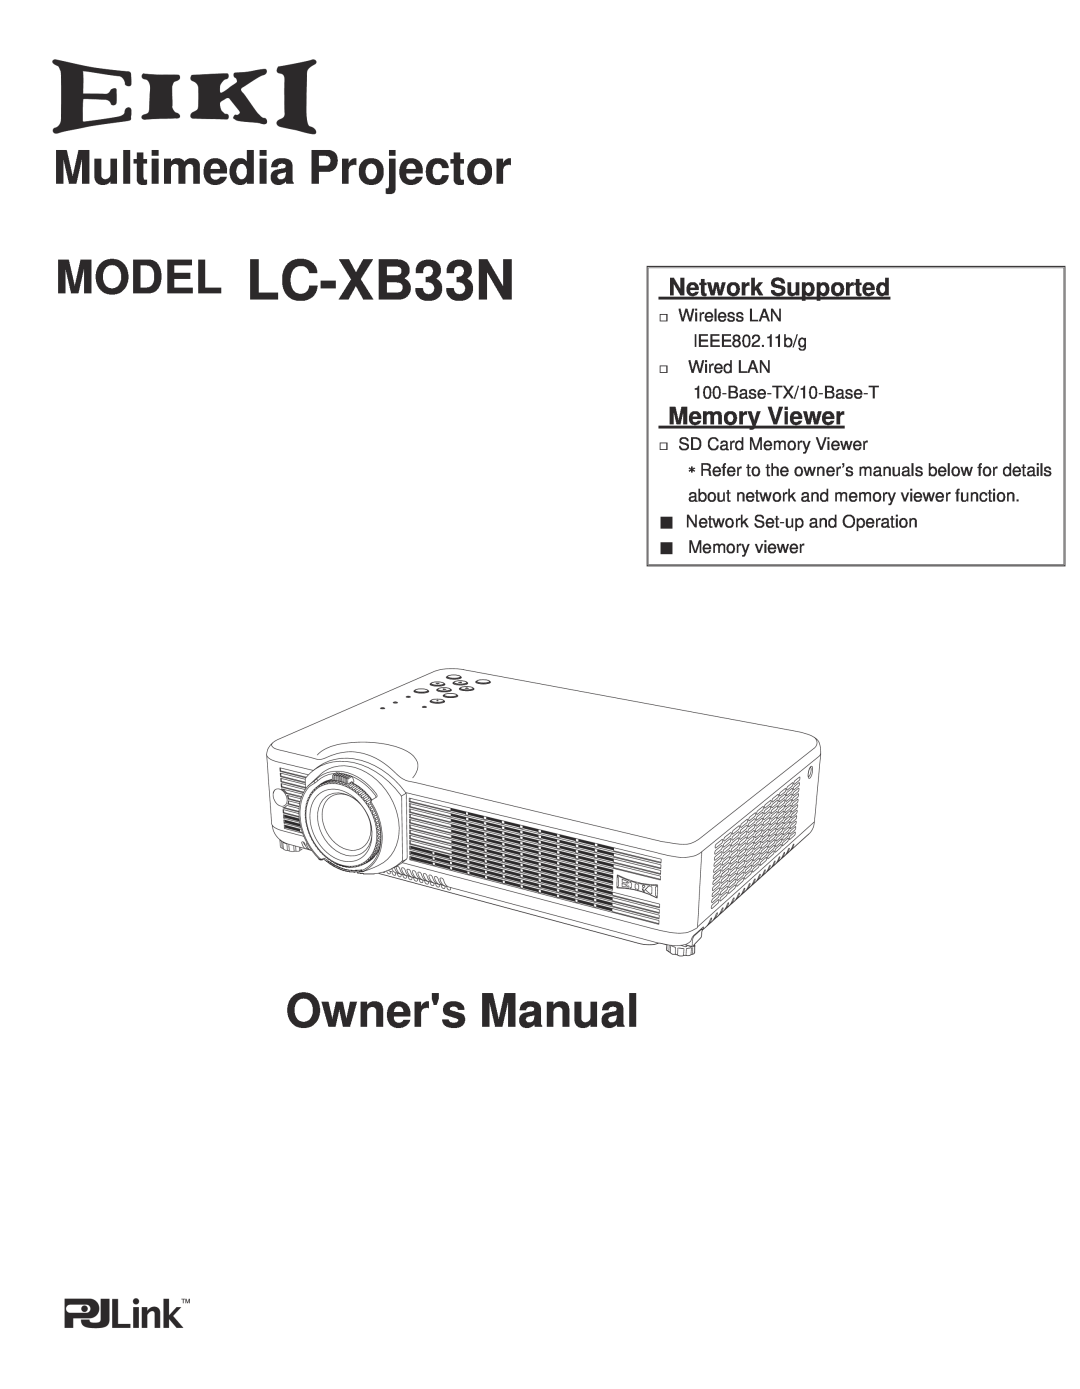 Eiki owner manual Network Supported, Memory Viewer, MODEL LC-XB33N, Multimedia Projector, Owners Manual 